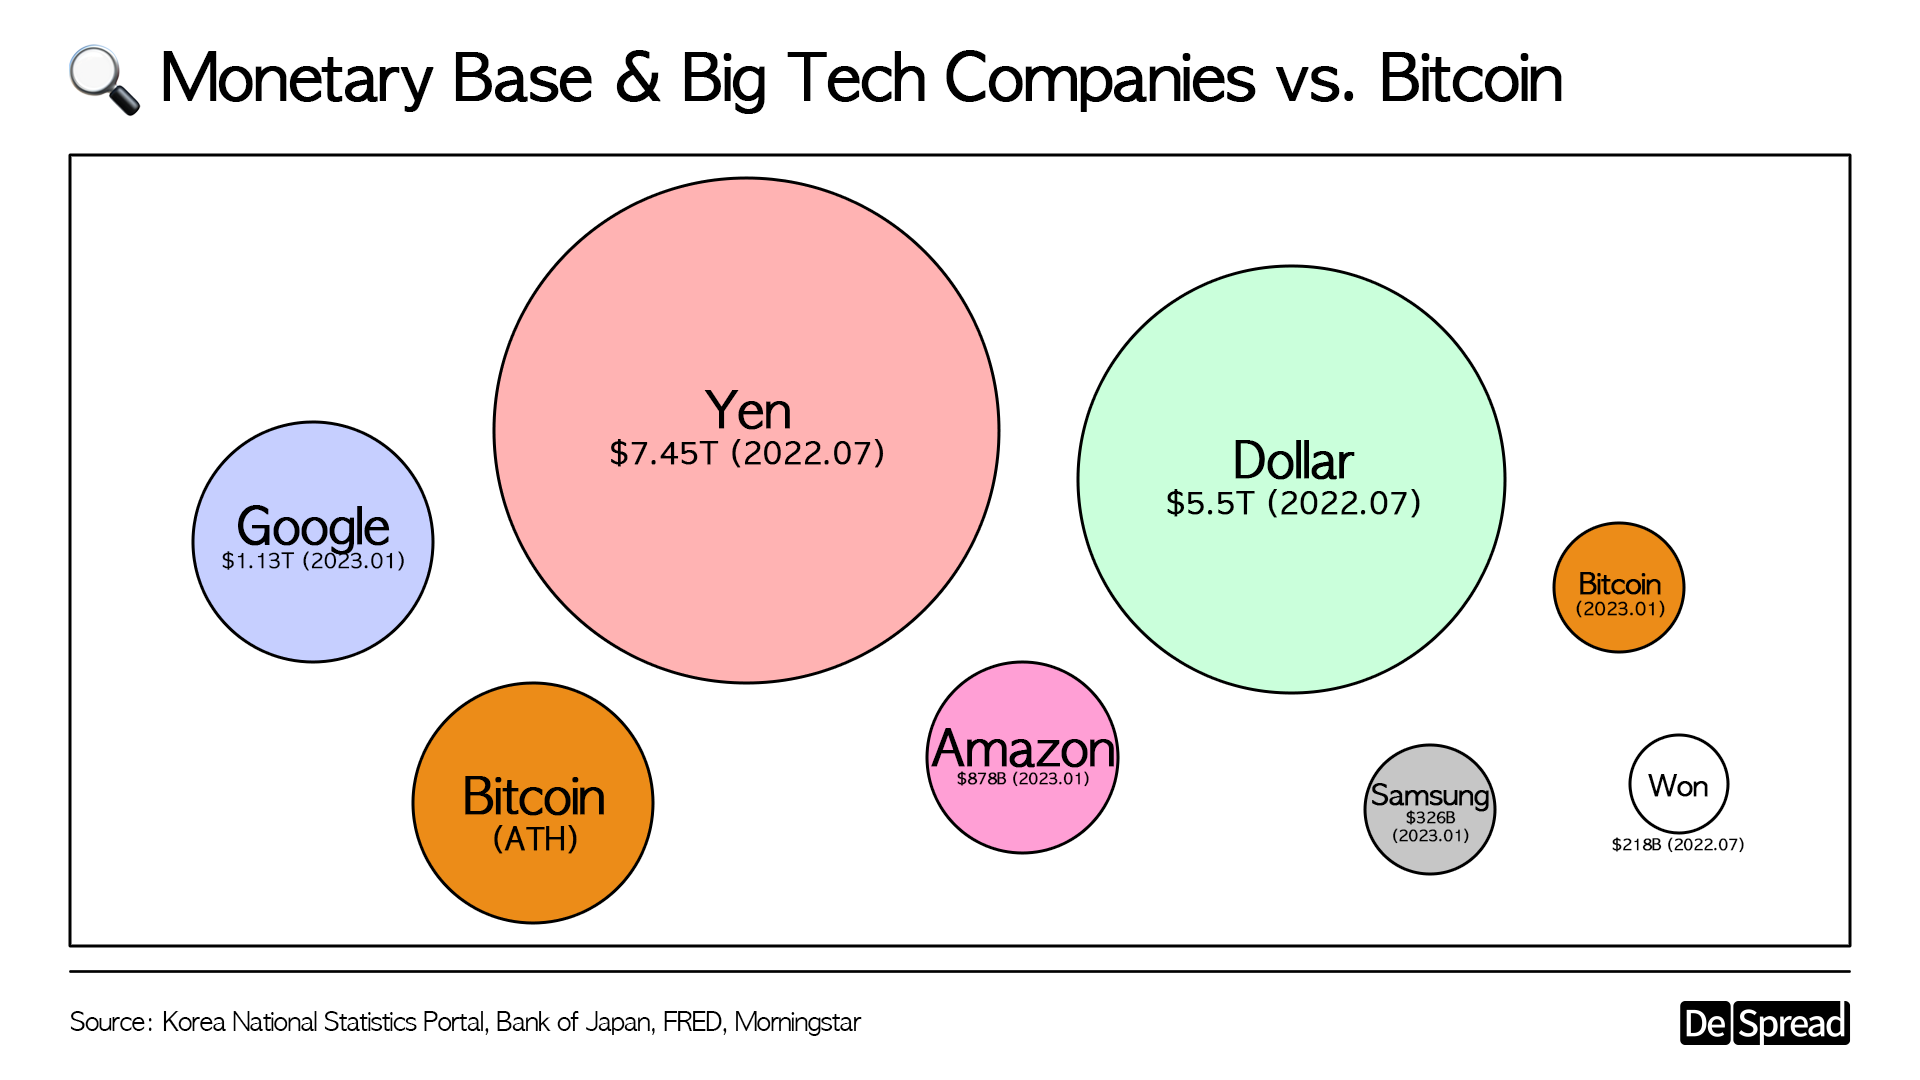 Fig. 1. A simple comparison of the Monetary bases, Big tech, and Bitcoin (The size of the circles does not accurately reflect the actual numbers).